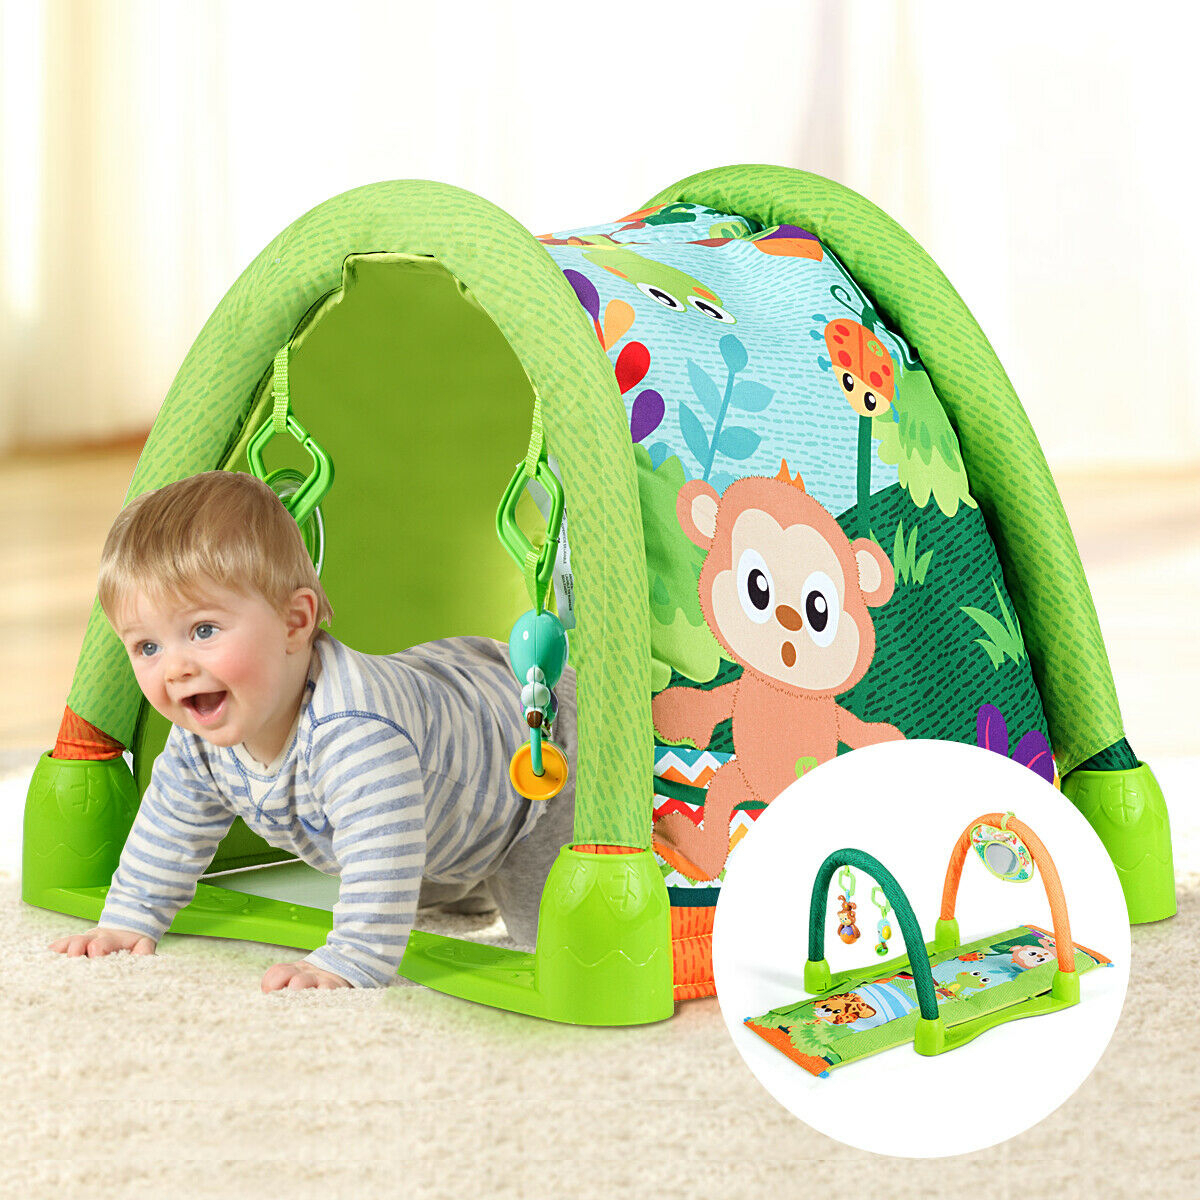 4-in-1 Green Activity Play Mat Baby Activity Center W/3 Hanging Toys